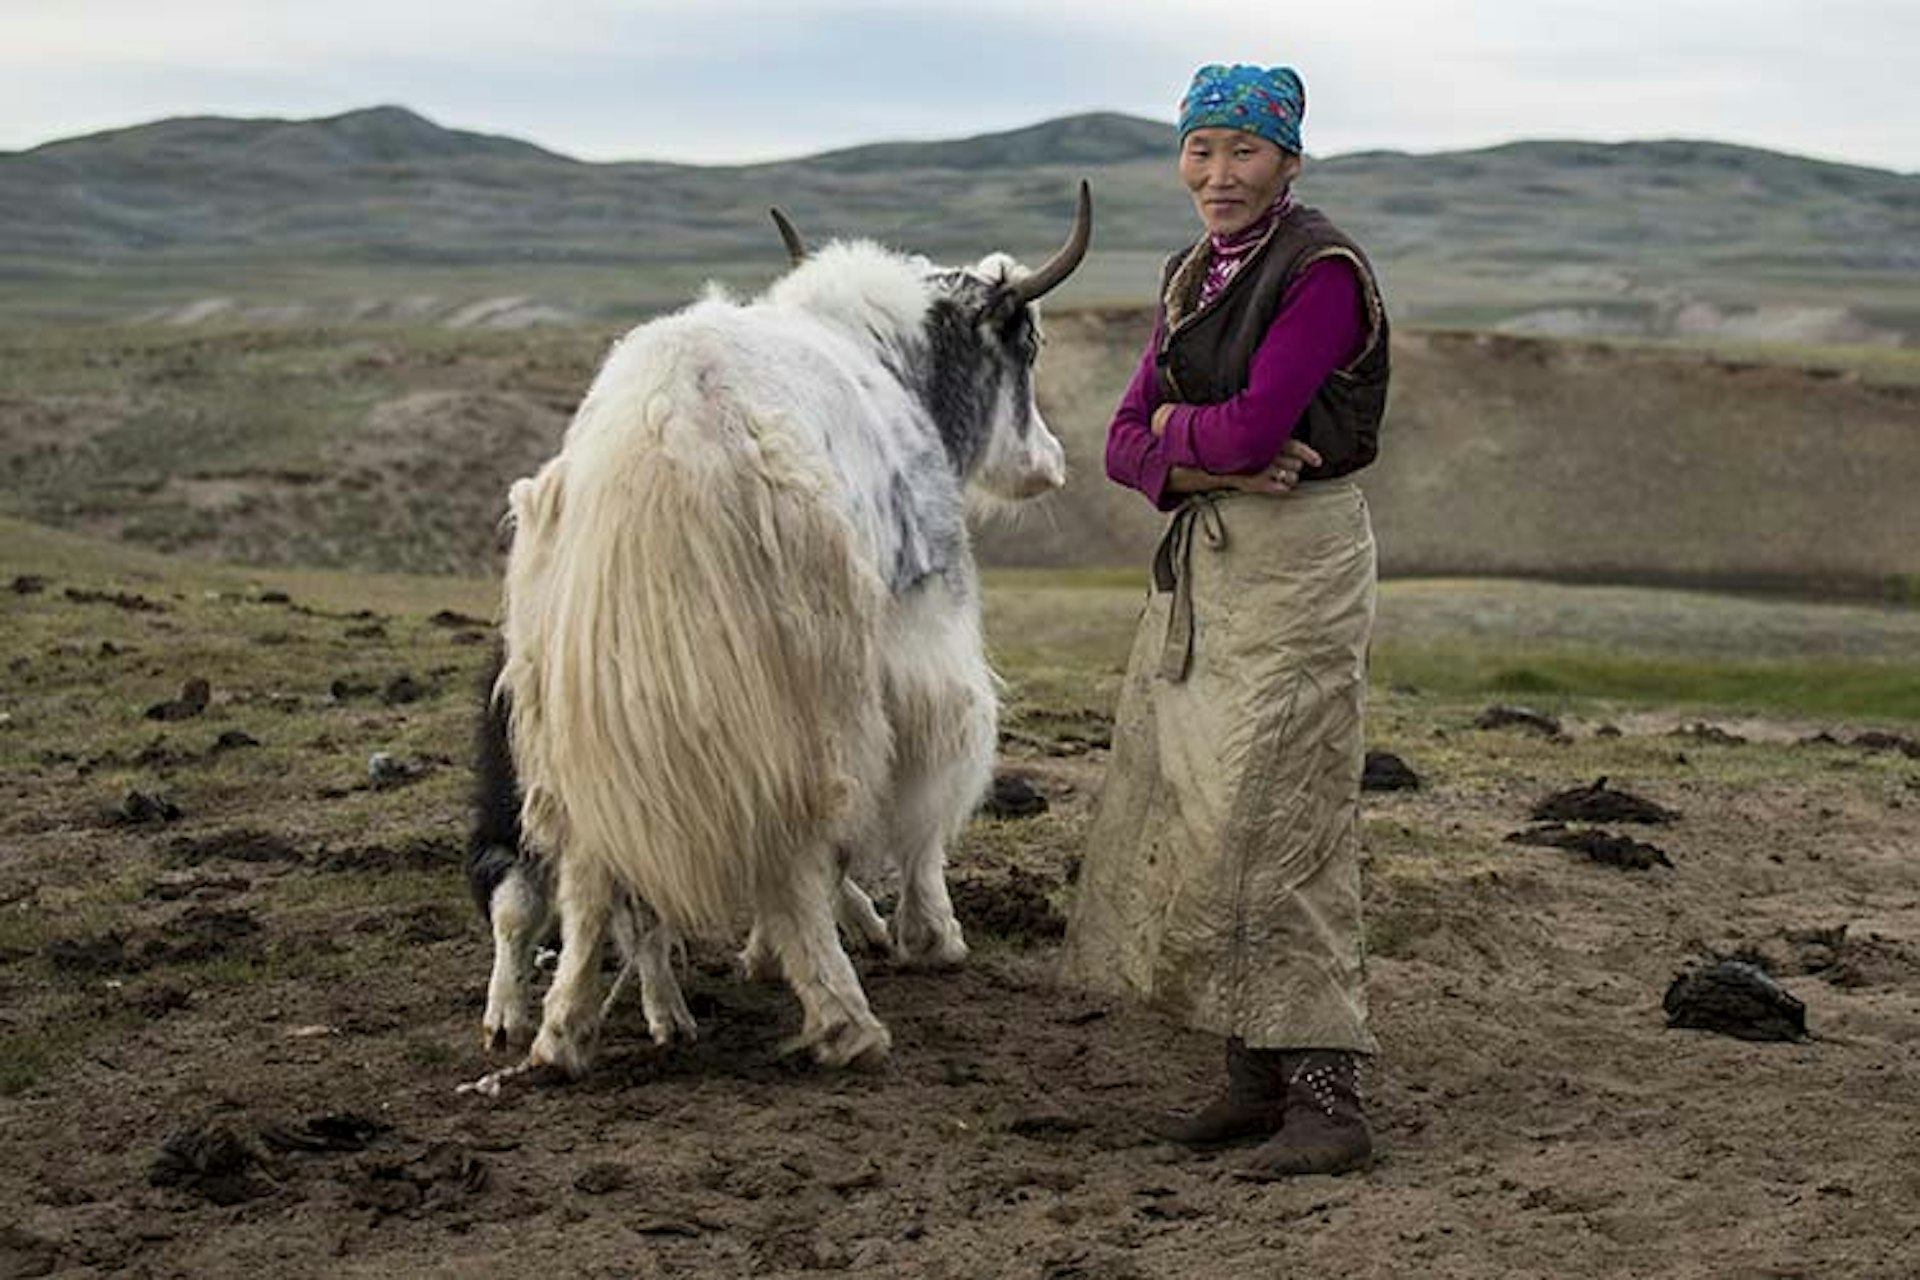 Yaks are essential to nomadic life. Image by David Baxendale / Lonely Planet